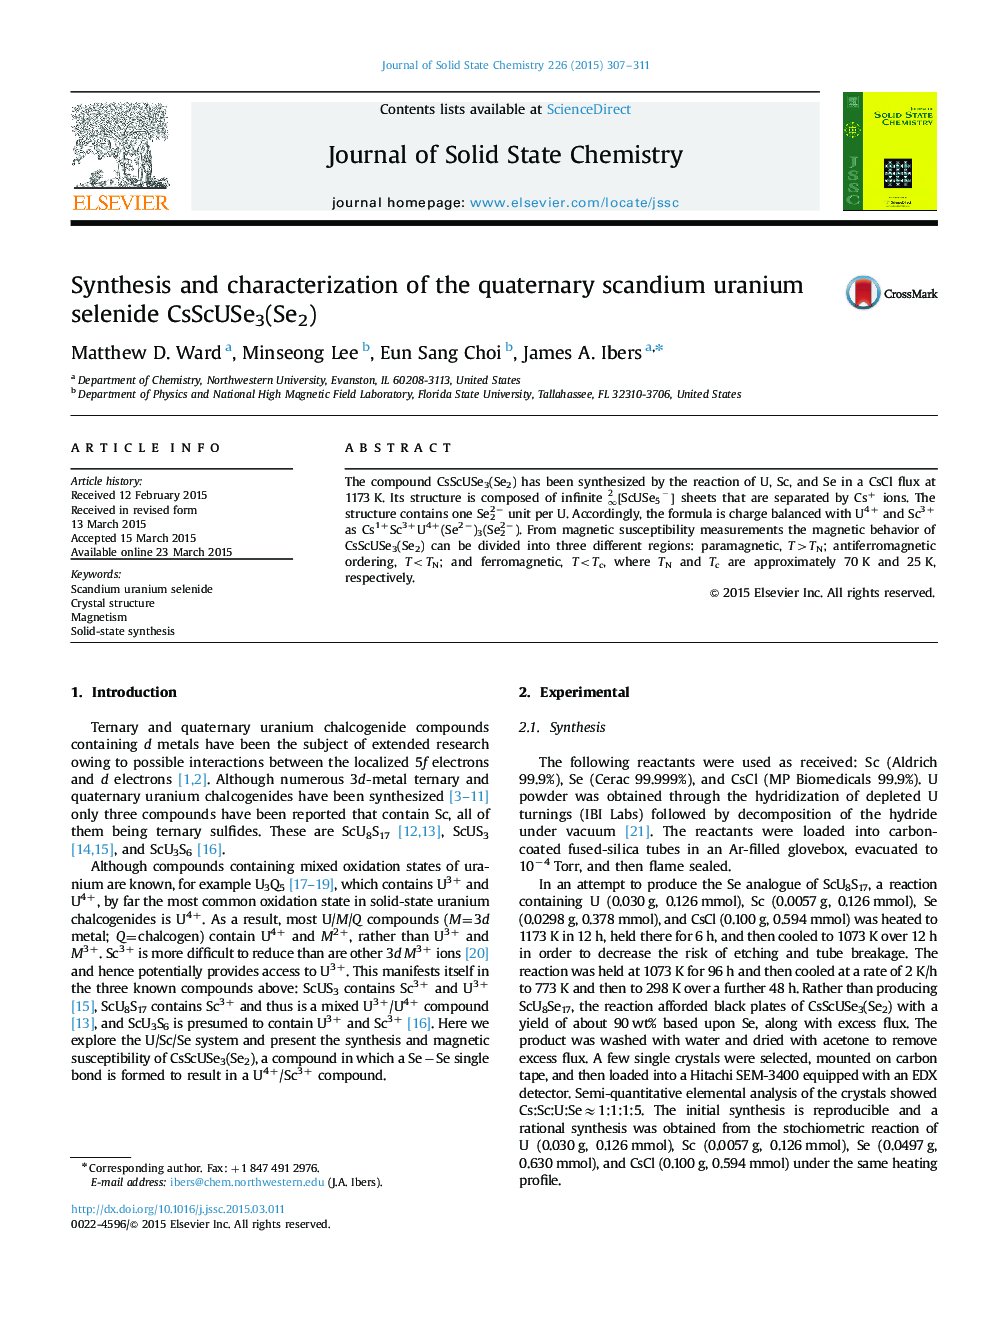 Synthesis and characterization of the quaternary scandium uranium selenide CsScUSe3(Se2)